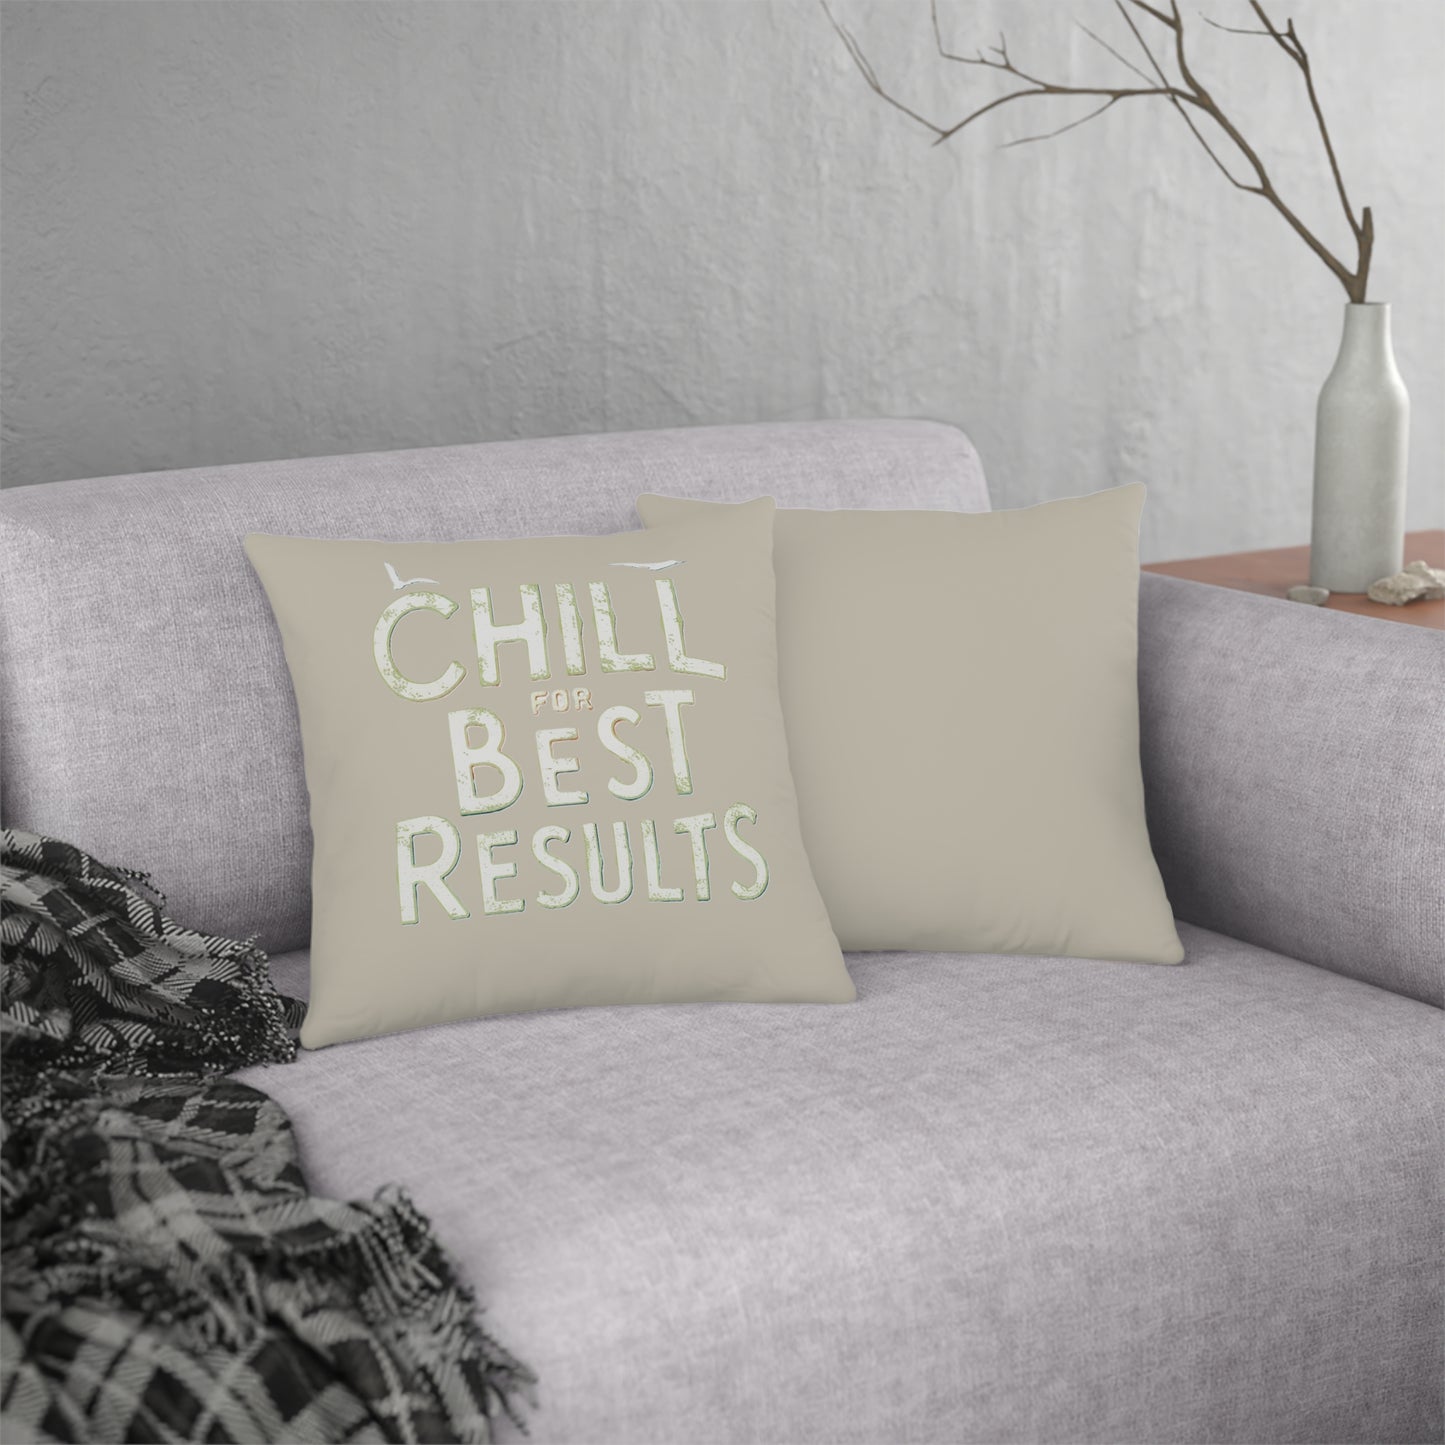 Chill for Best Results Sand - Waterproof Pillow